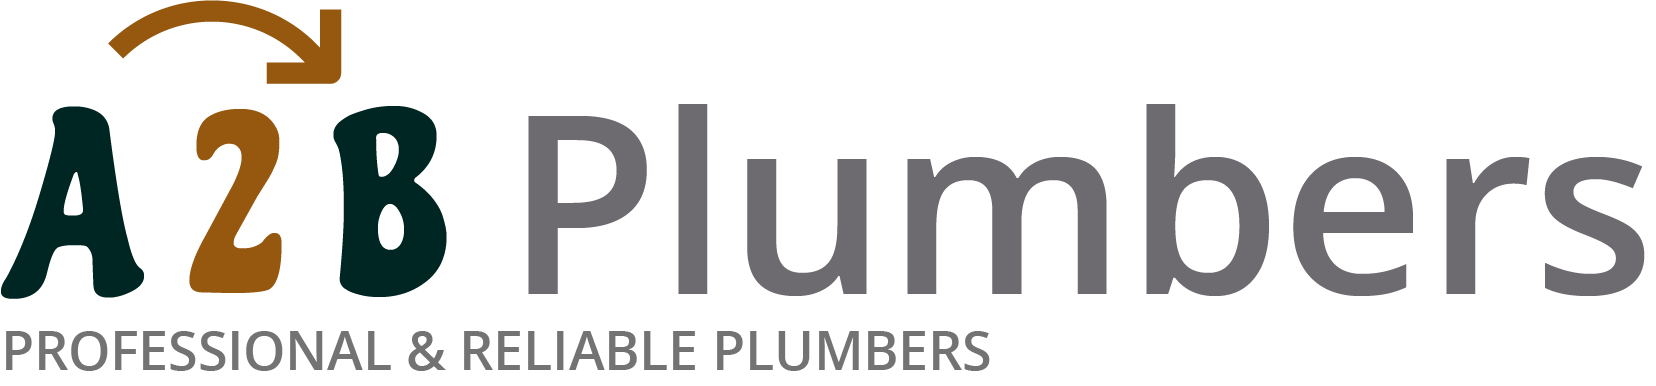 If you need a boiler installed, a radiator repaired or a leaking tap fixed, call us now - we provide services for properties in Chorlton Cum Hardy and the local area.